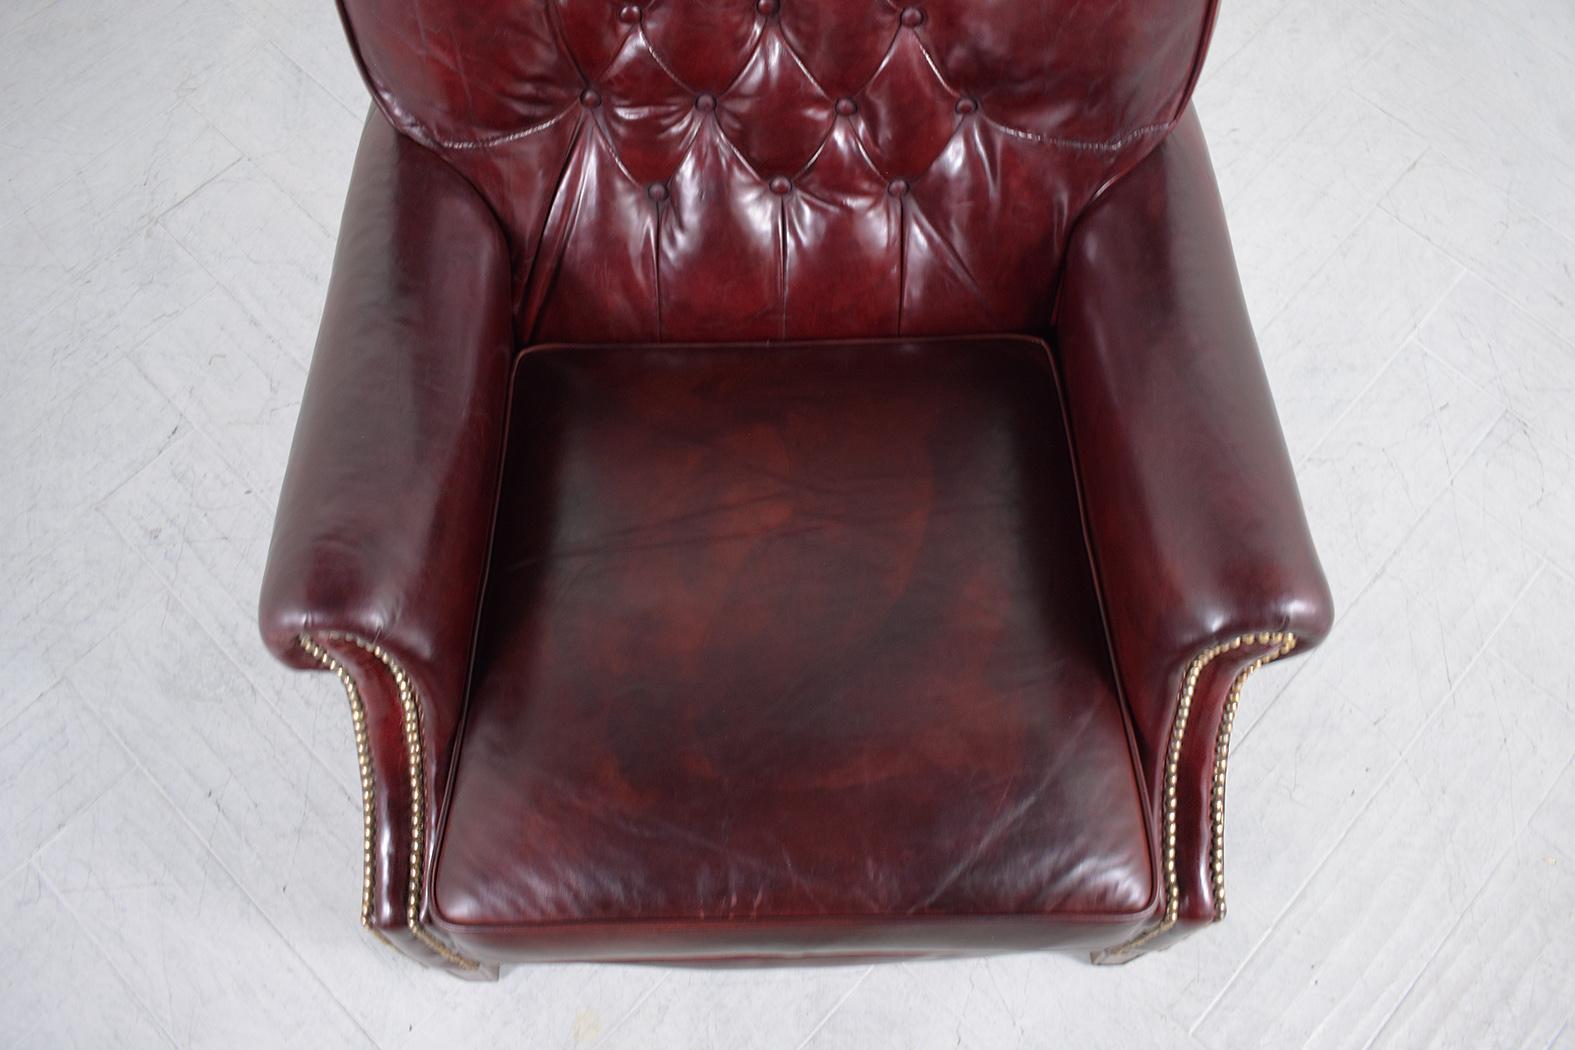 Antique English Chesterfield Lounge Chair: Cordovan Red Leather Tufted Design In Good Condition For Sale In Los Angeles, CA